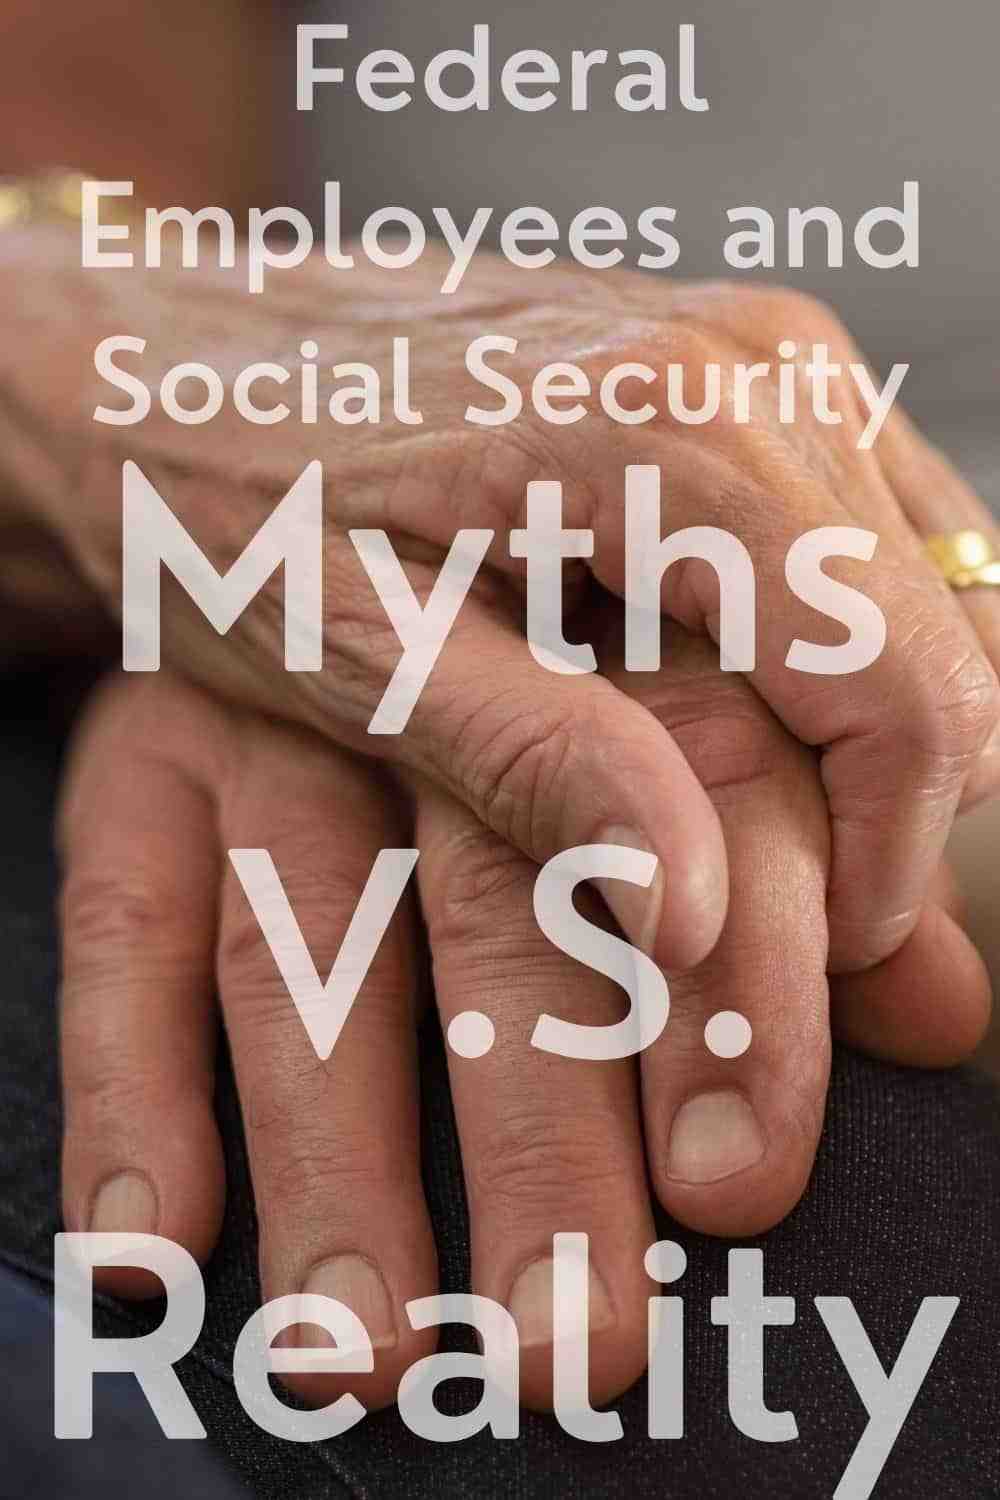 What's the most you can get from Social Security?